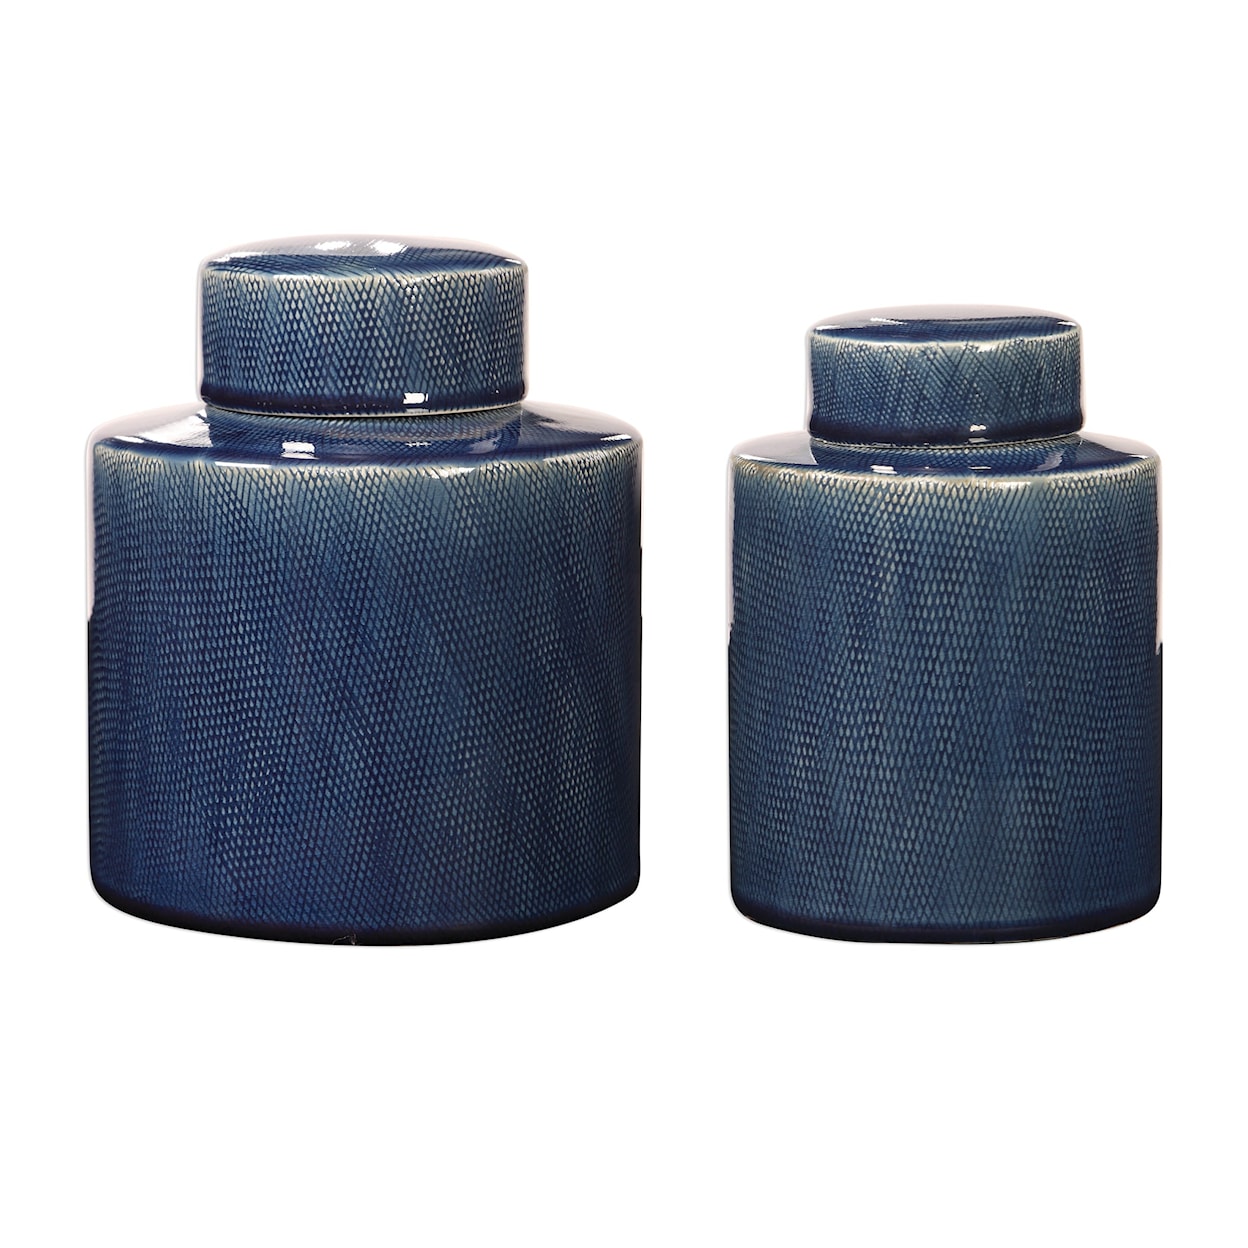 Uttermost Accessories Saniya Blue Containers, S/2